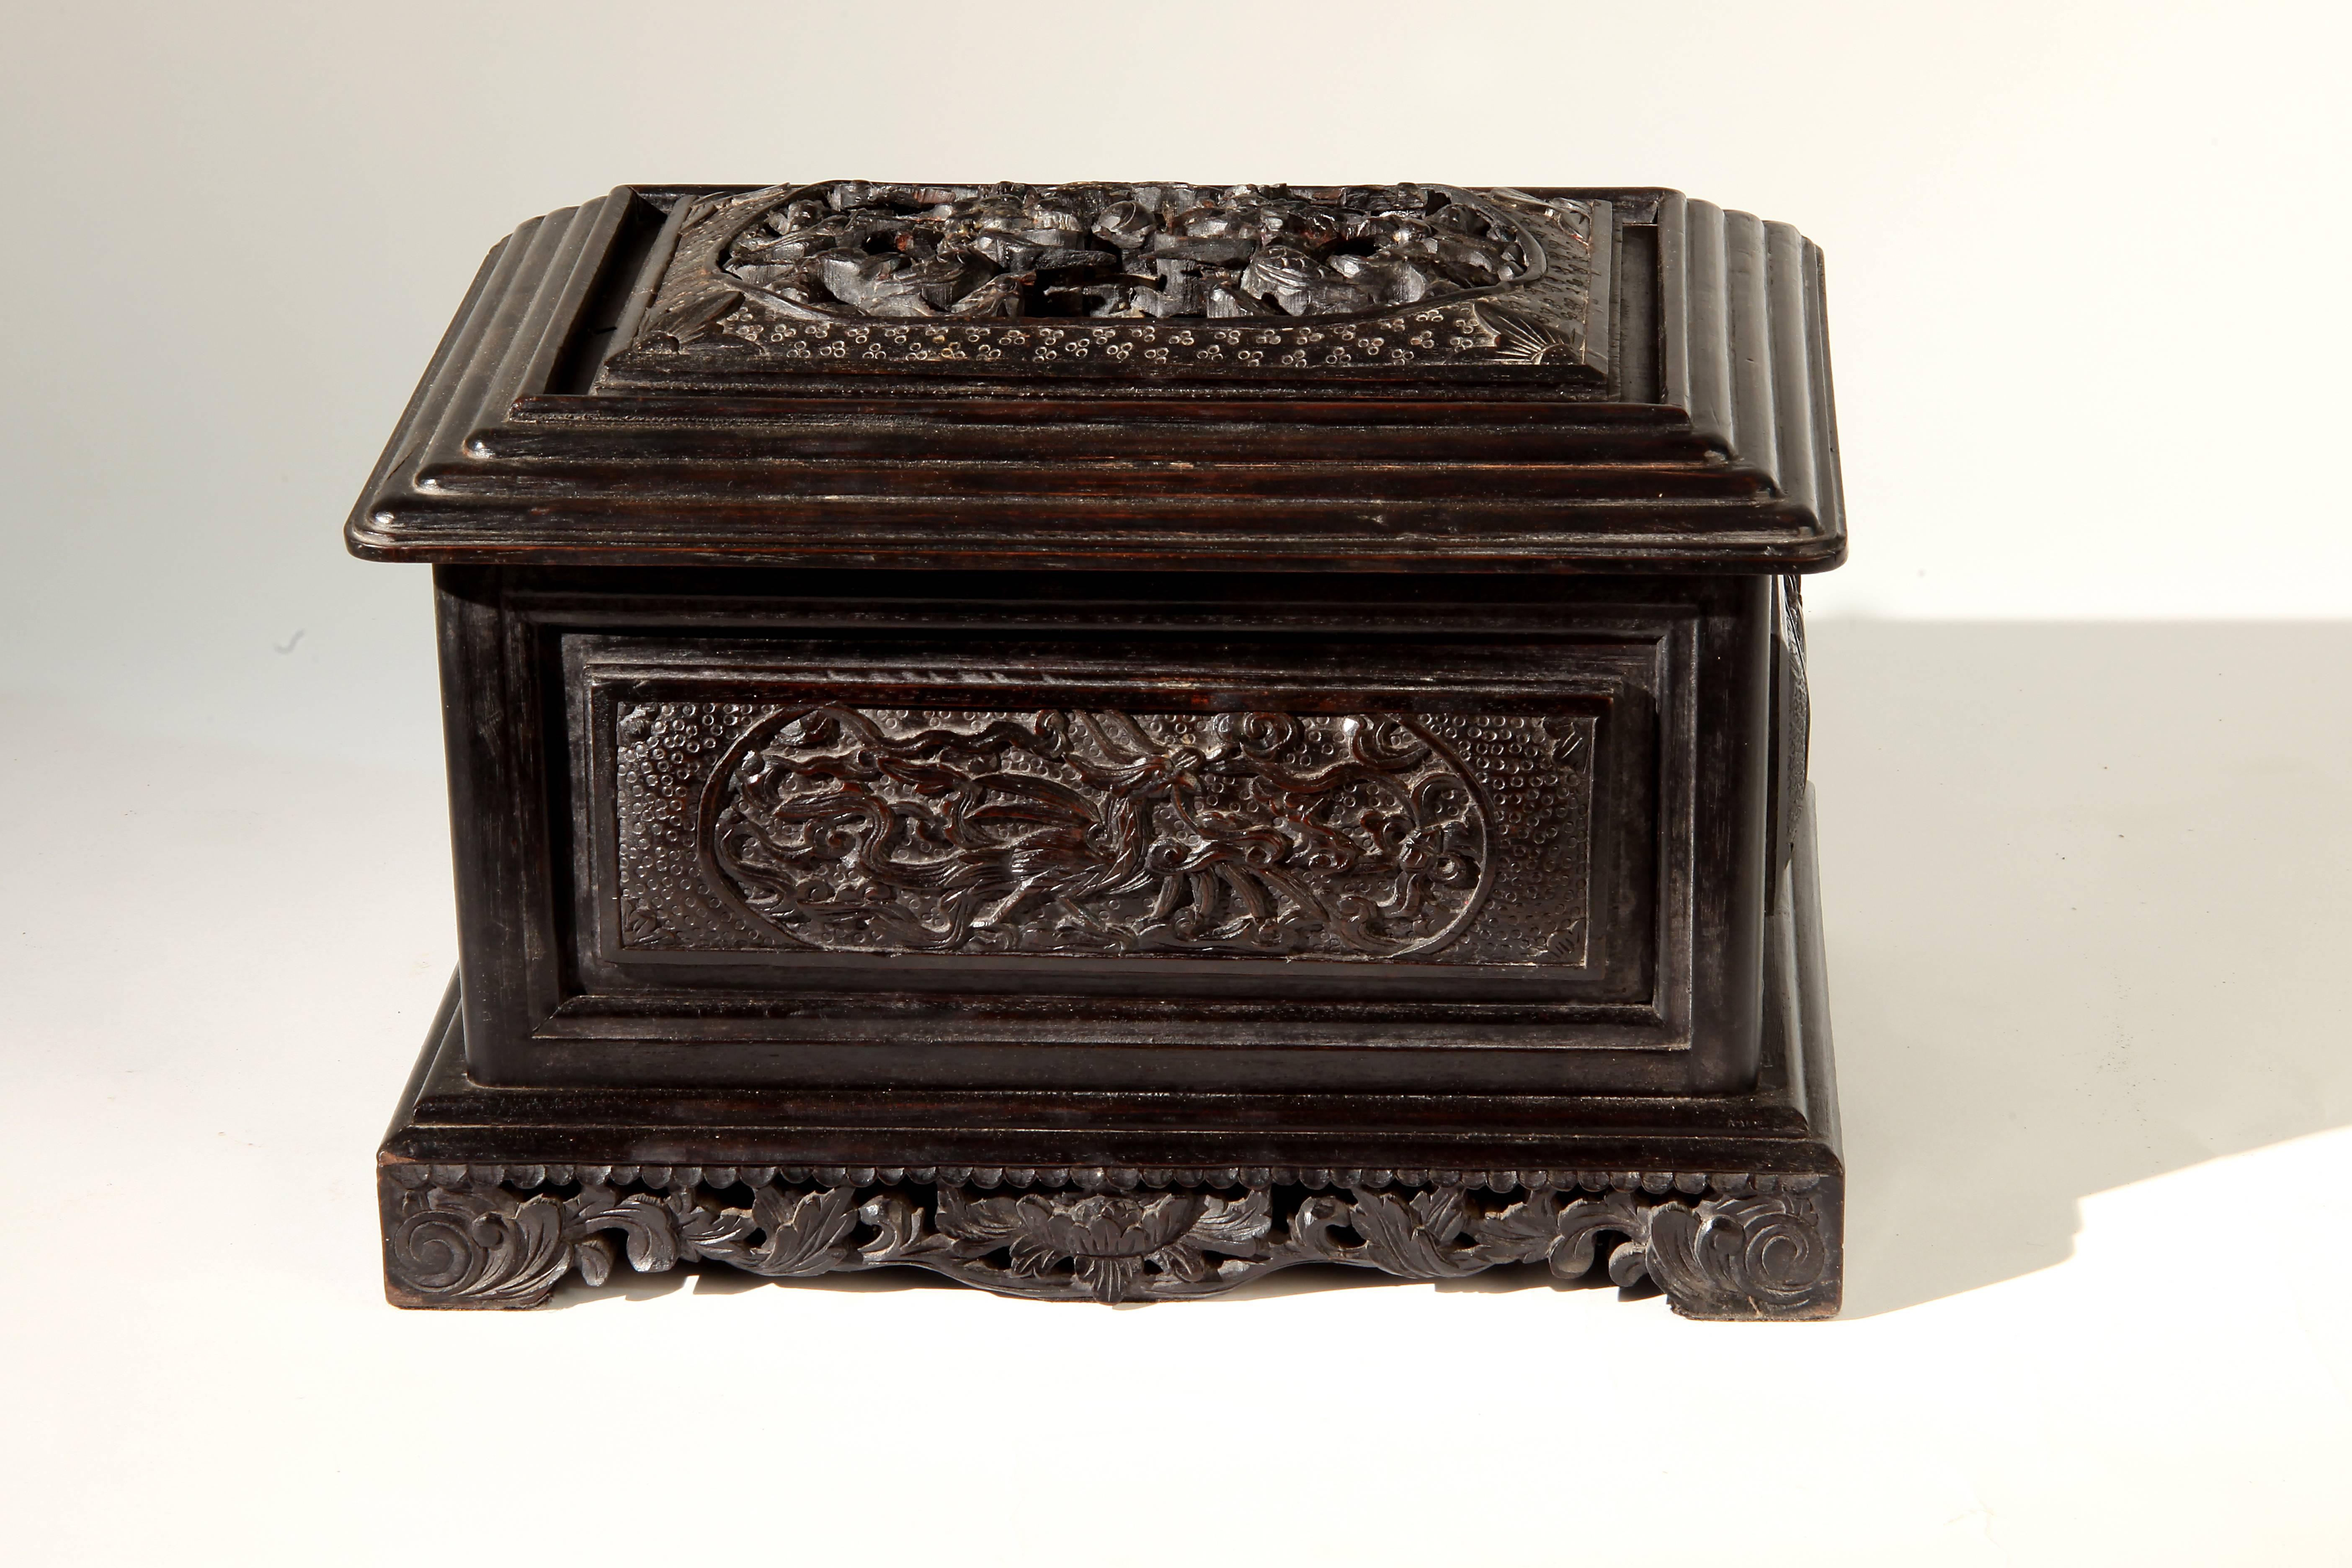 This carved jewelry box is from Thailand and is made from teakwood. It features a mirror and storage compartments inside.